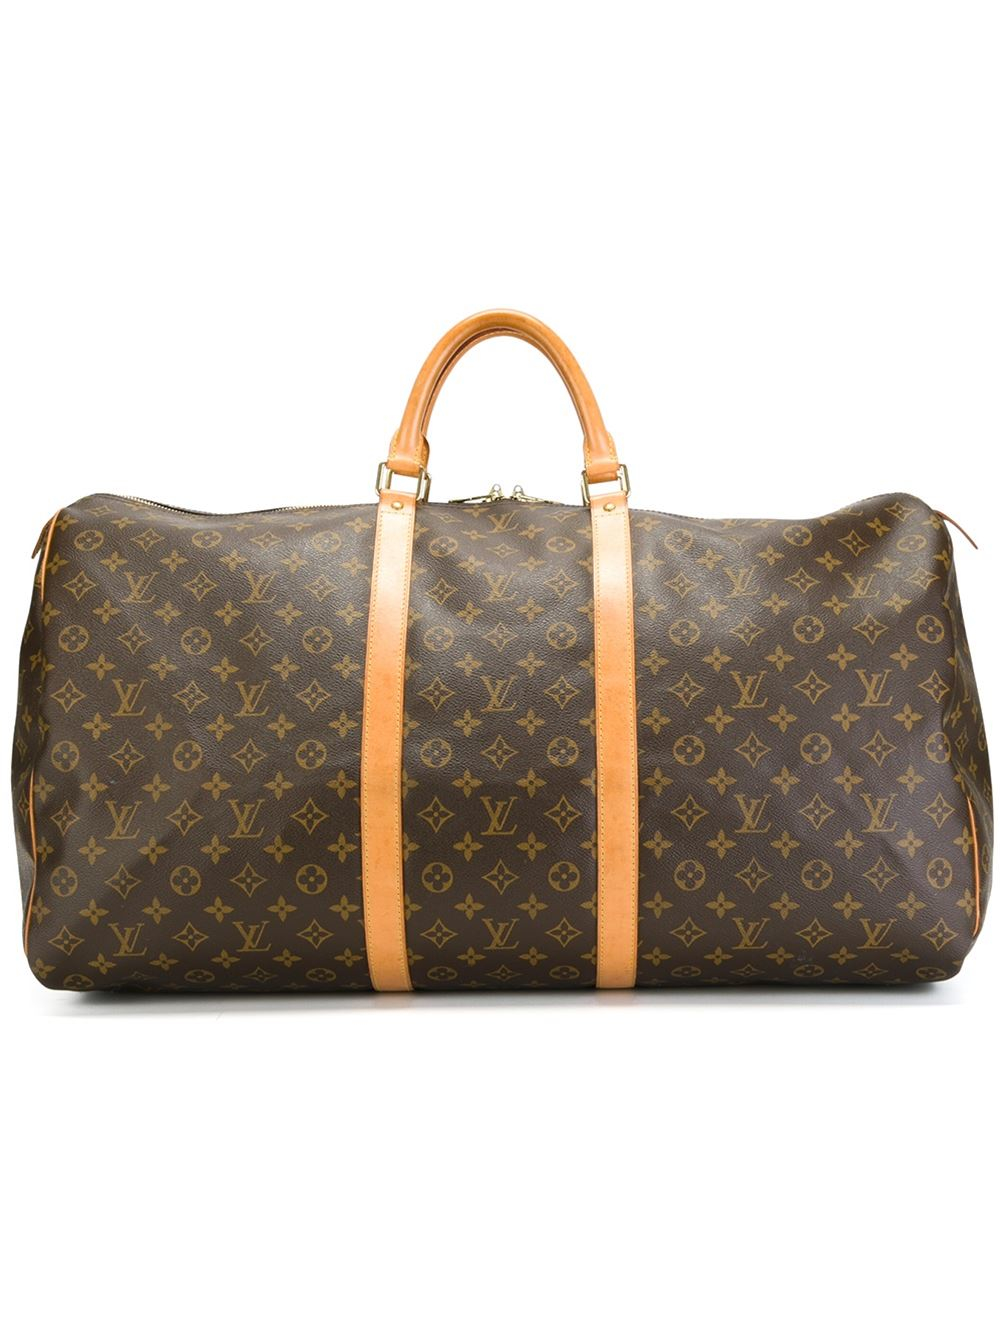 Used Louis Vuitton Travel Bags | SEMA Data Co-op